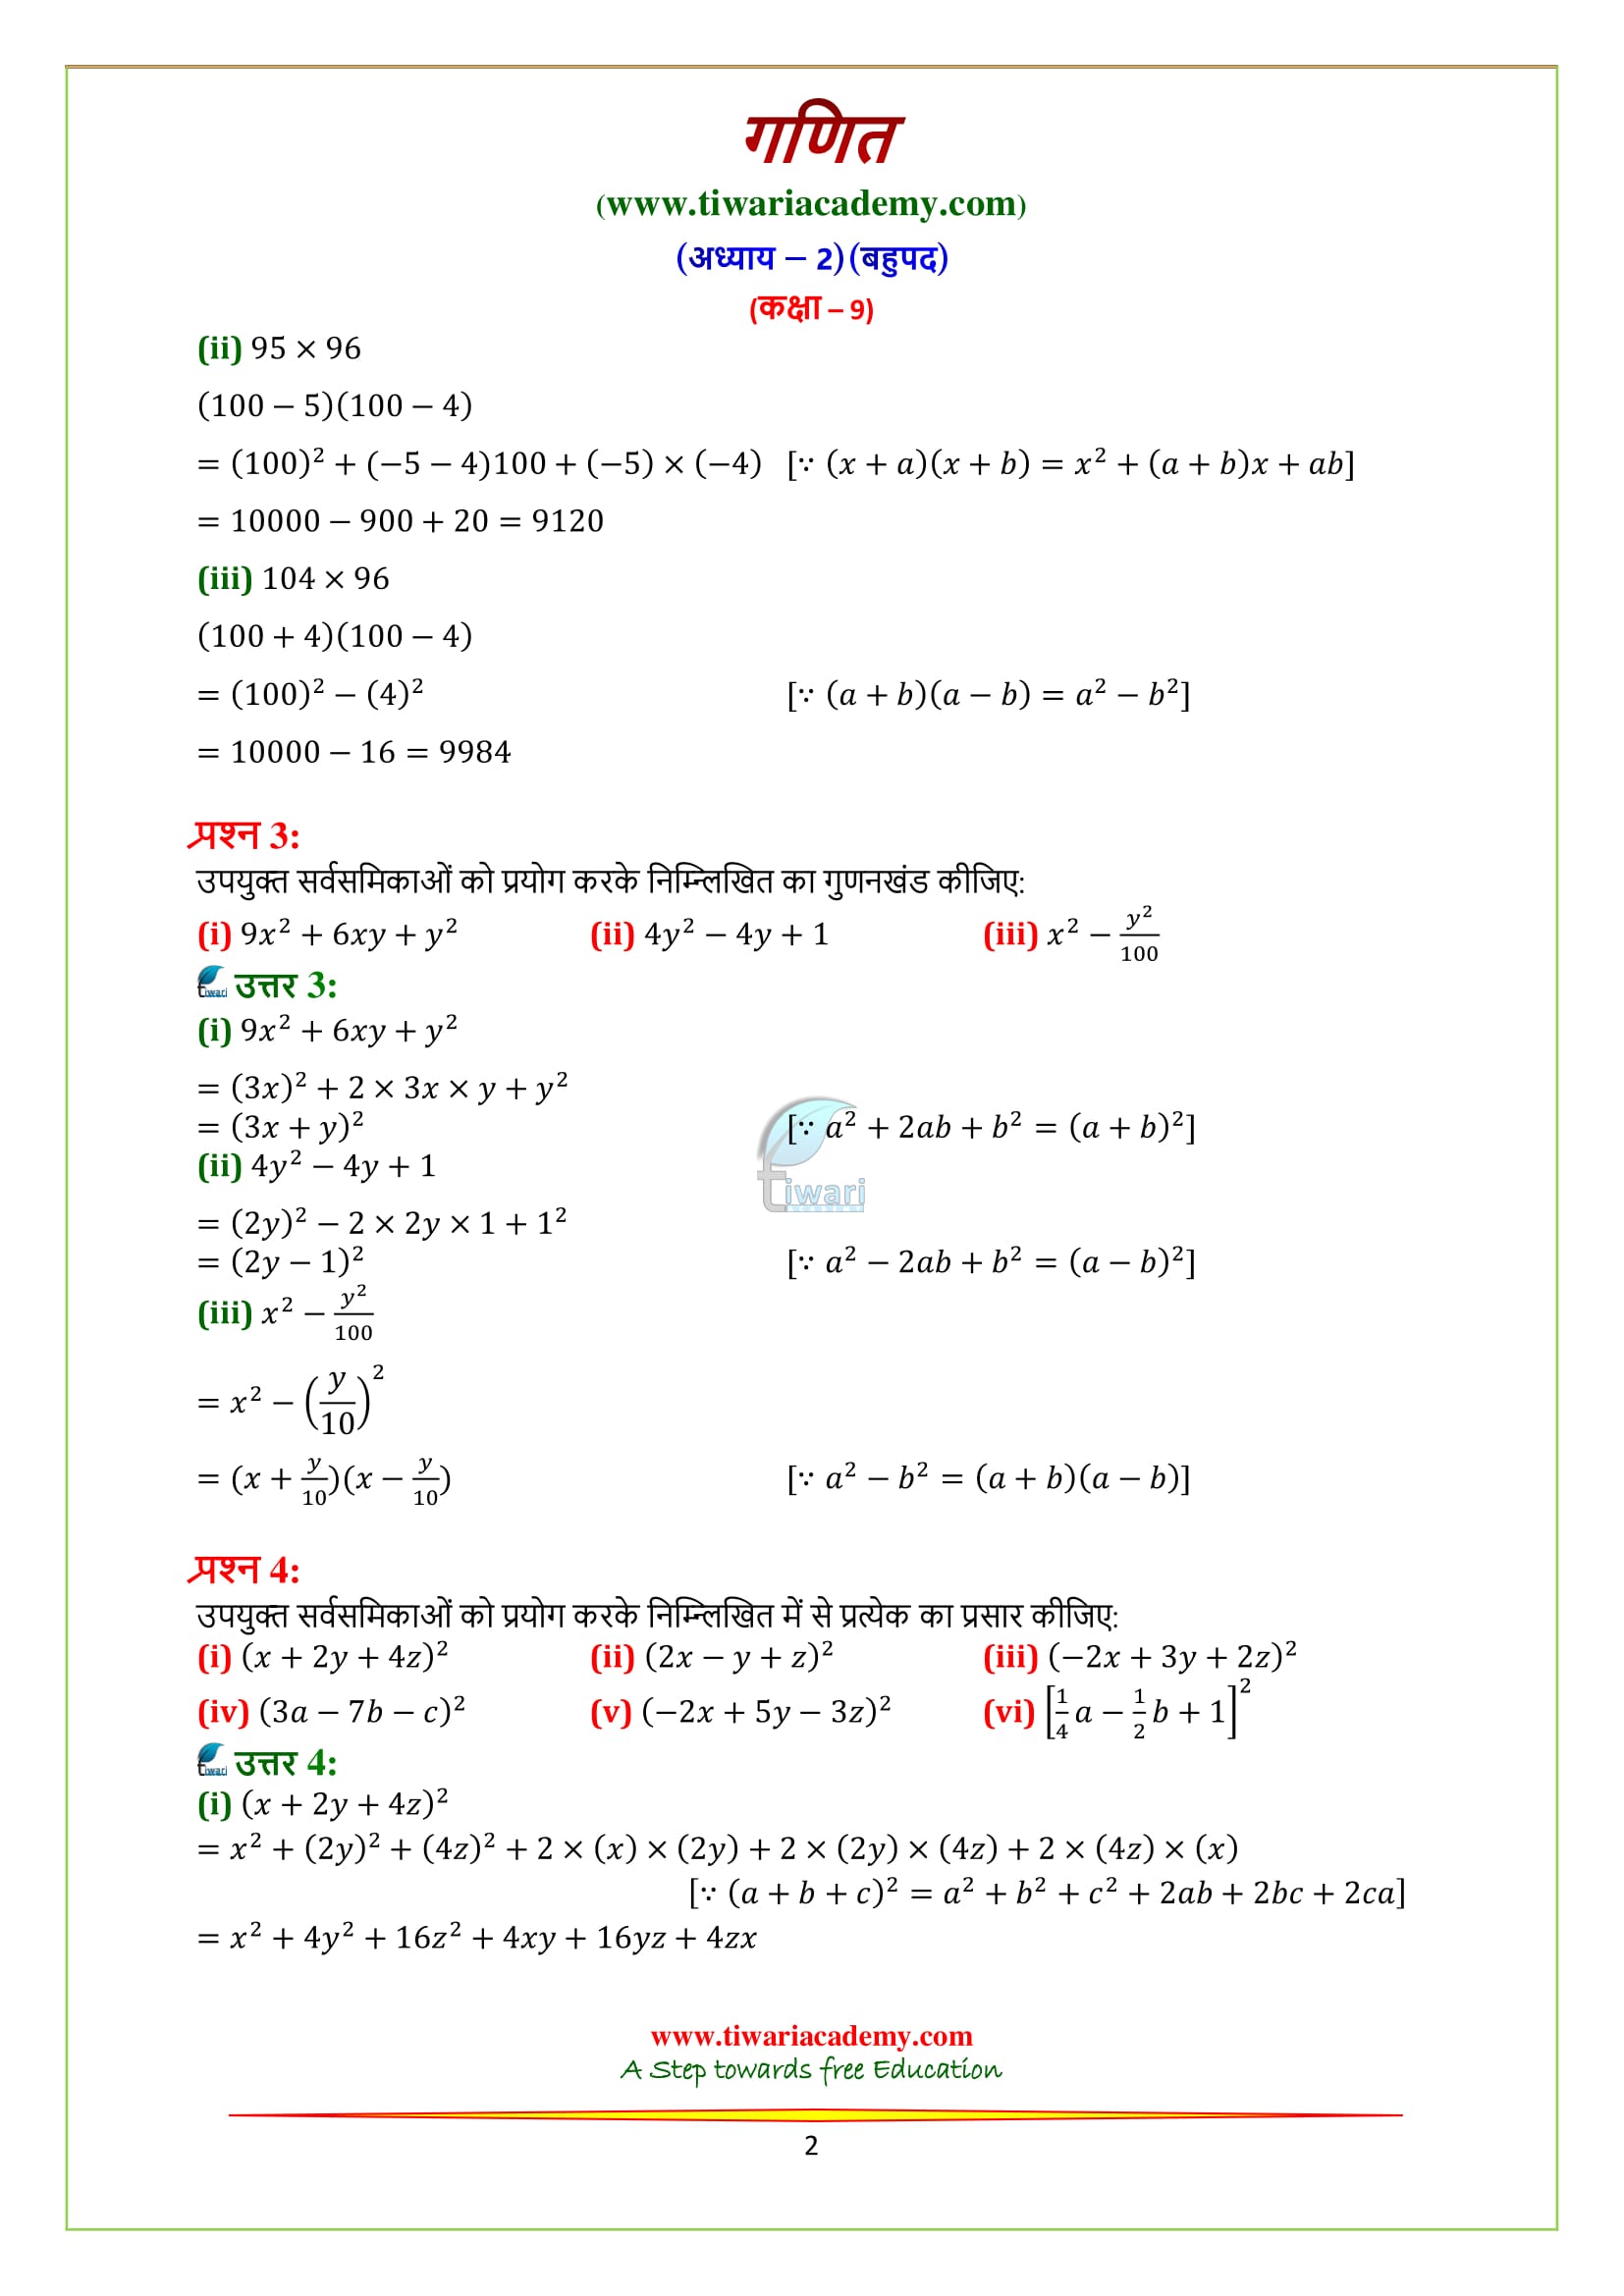 NCERT Solutions for class 9 Maths chapter 2 exercise 2.5 in Hindi